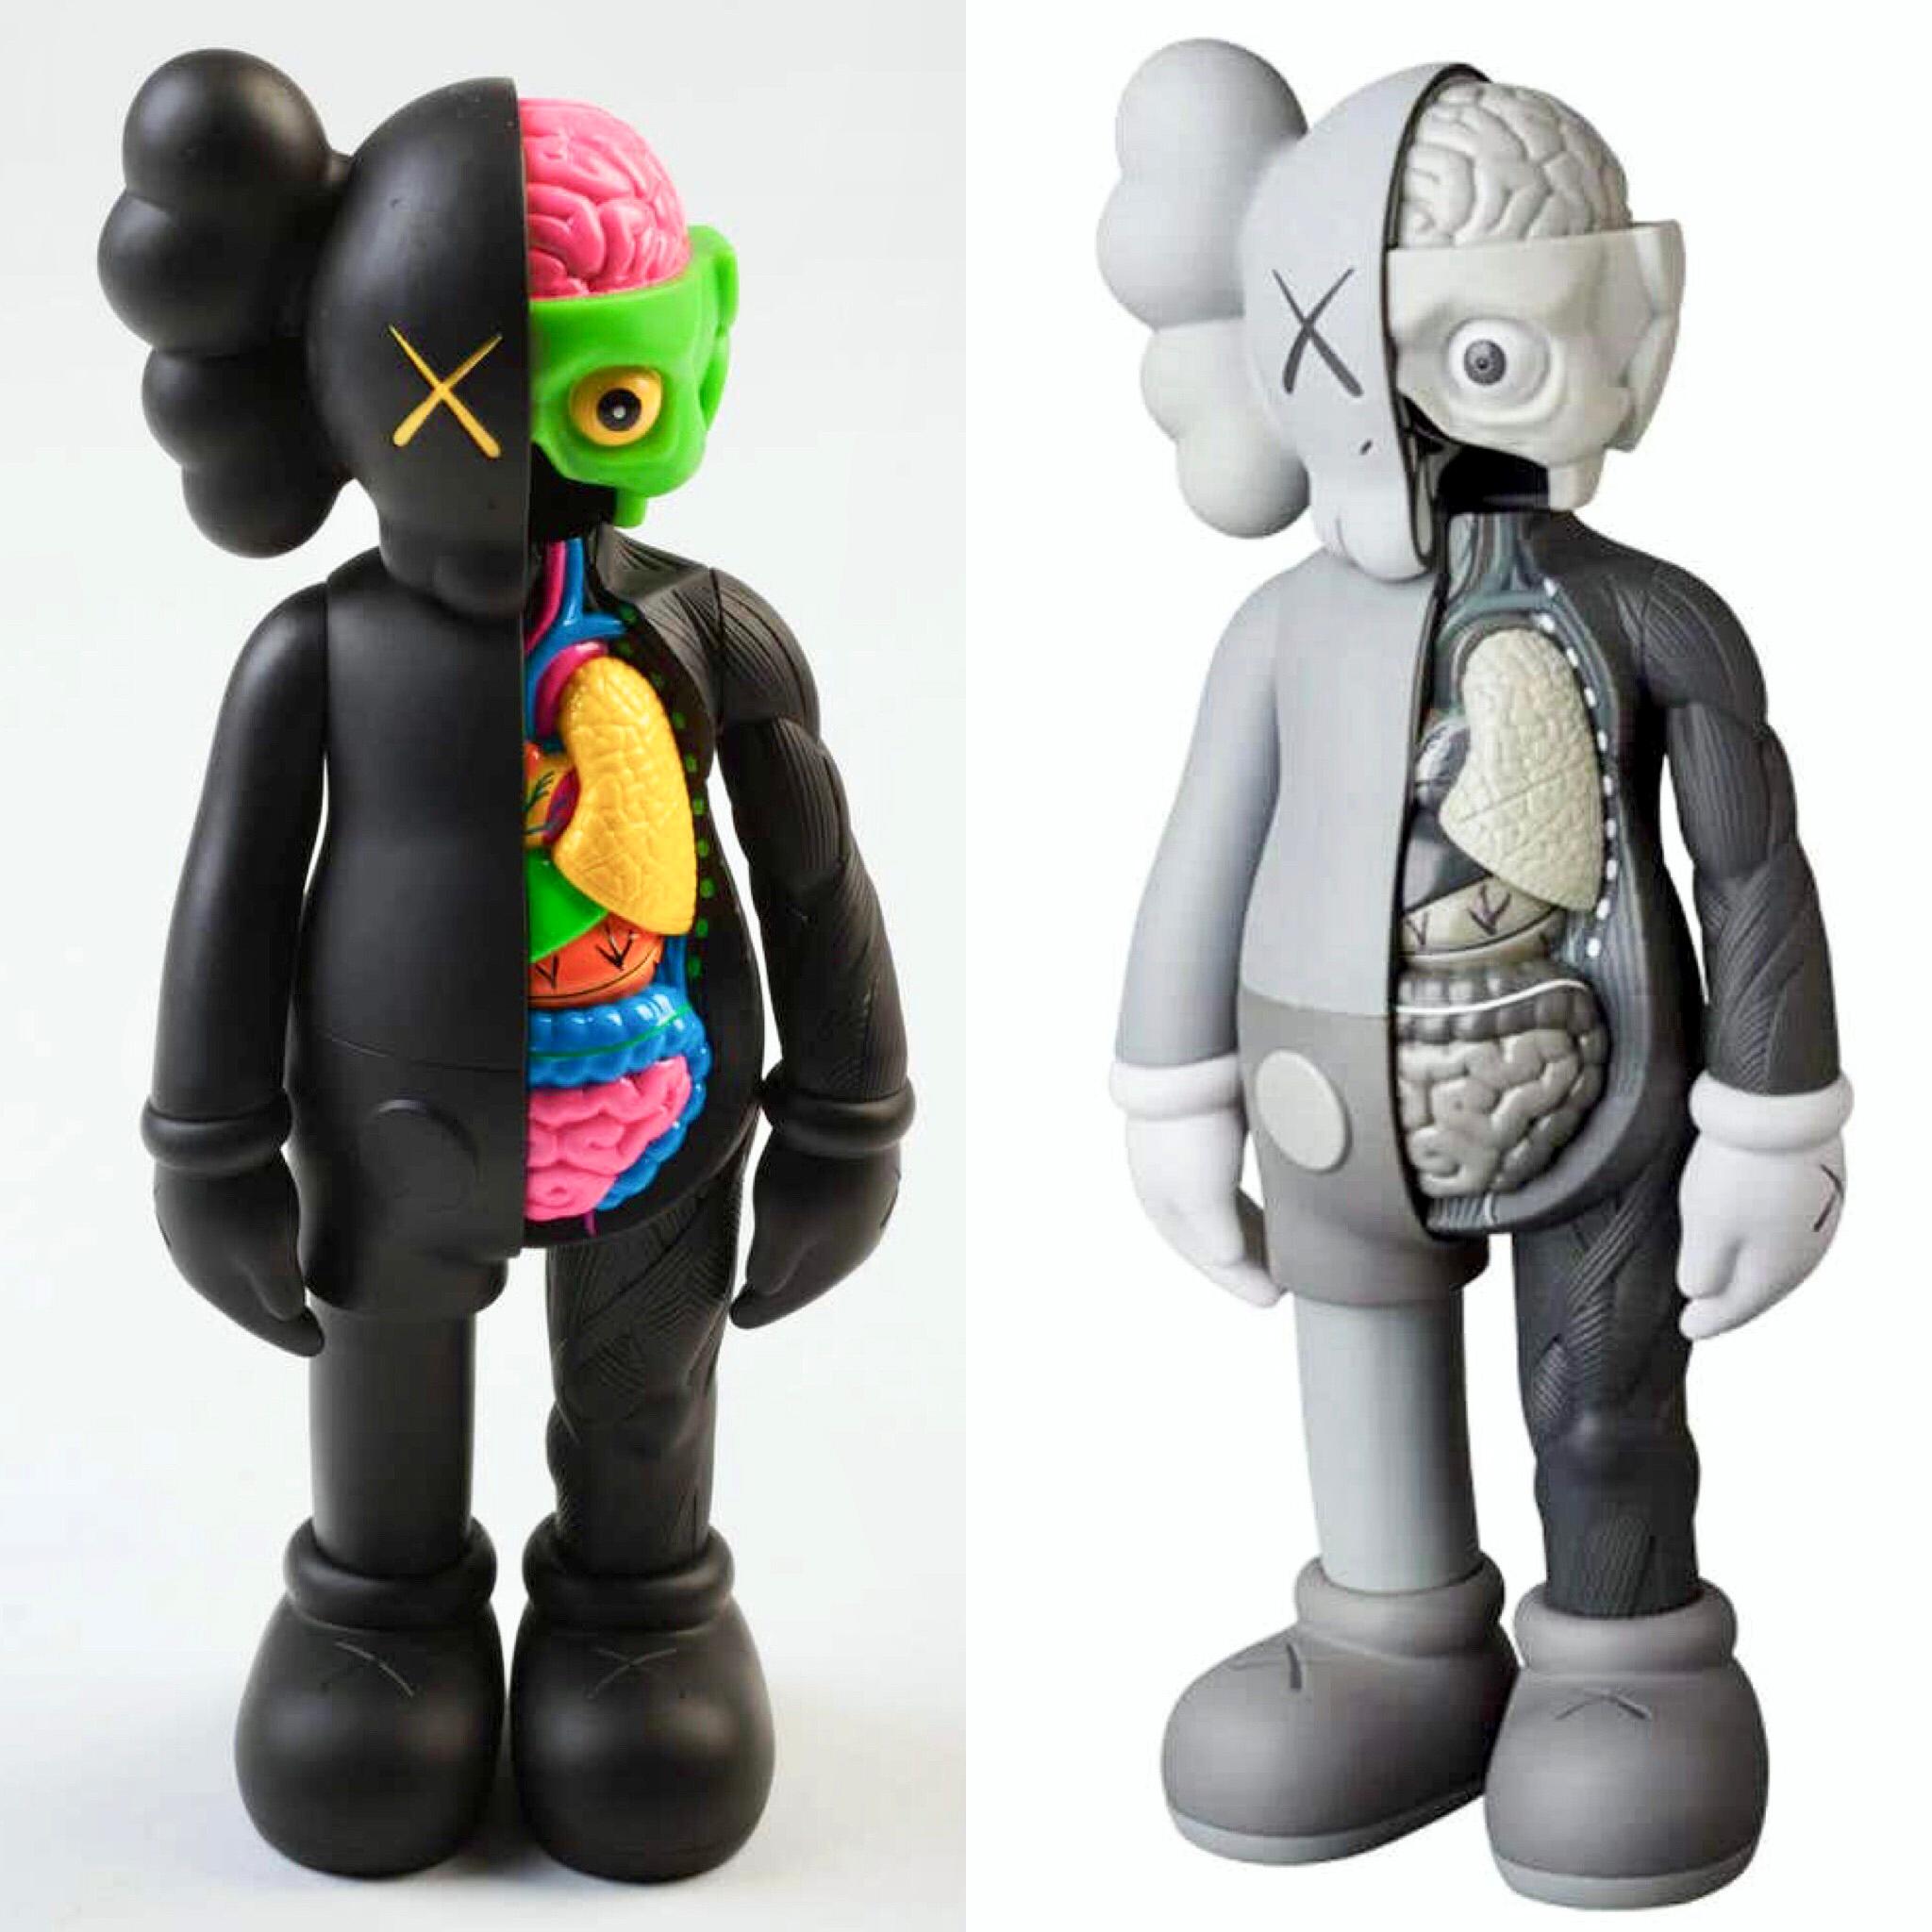 KAWS Flayed Companion: Set of 2. Each, new and sealed in their original packaging. Published by Medicom Japan in conjunction with the exhibition, KAWS: Where The End Starts at the Modern Art Museum of Fort Worth in 2016. 

Medium: Vinyl paint, cast